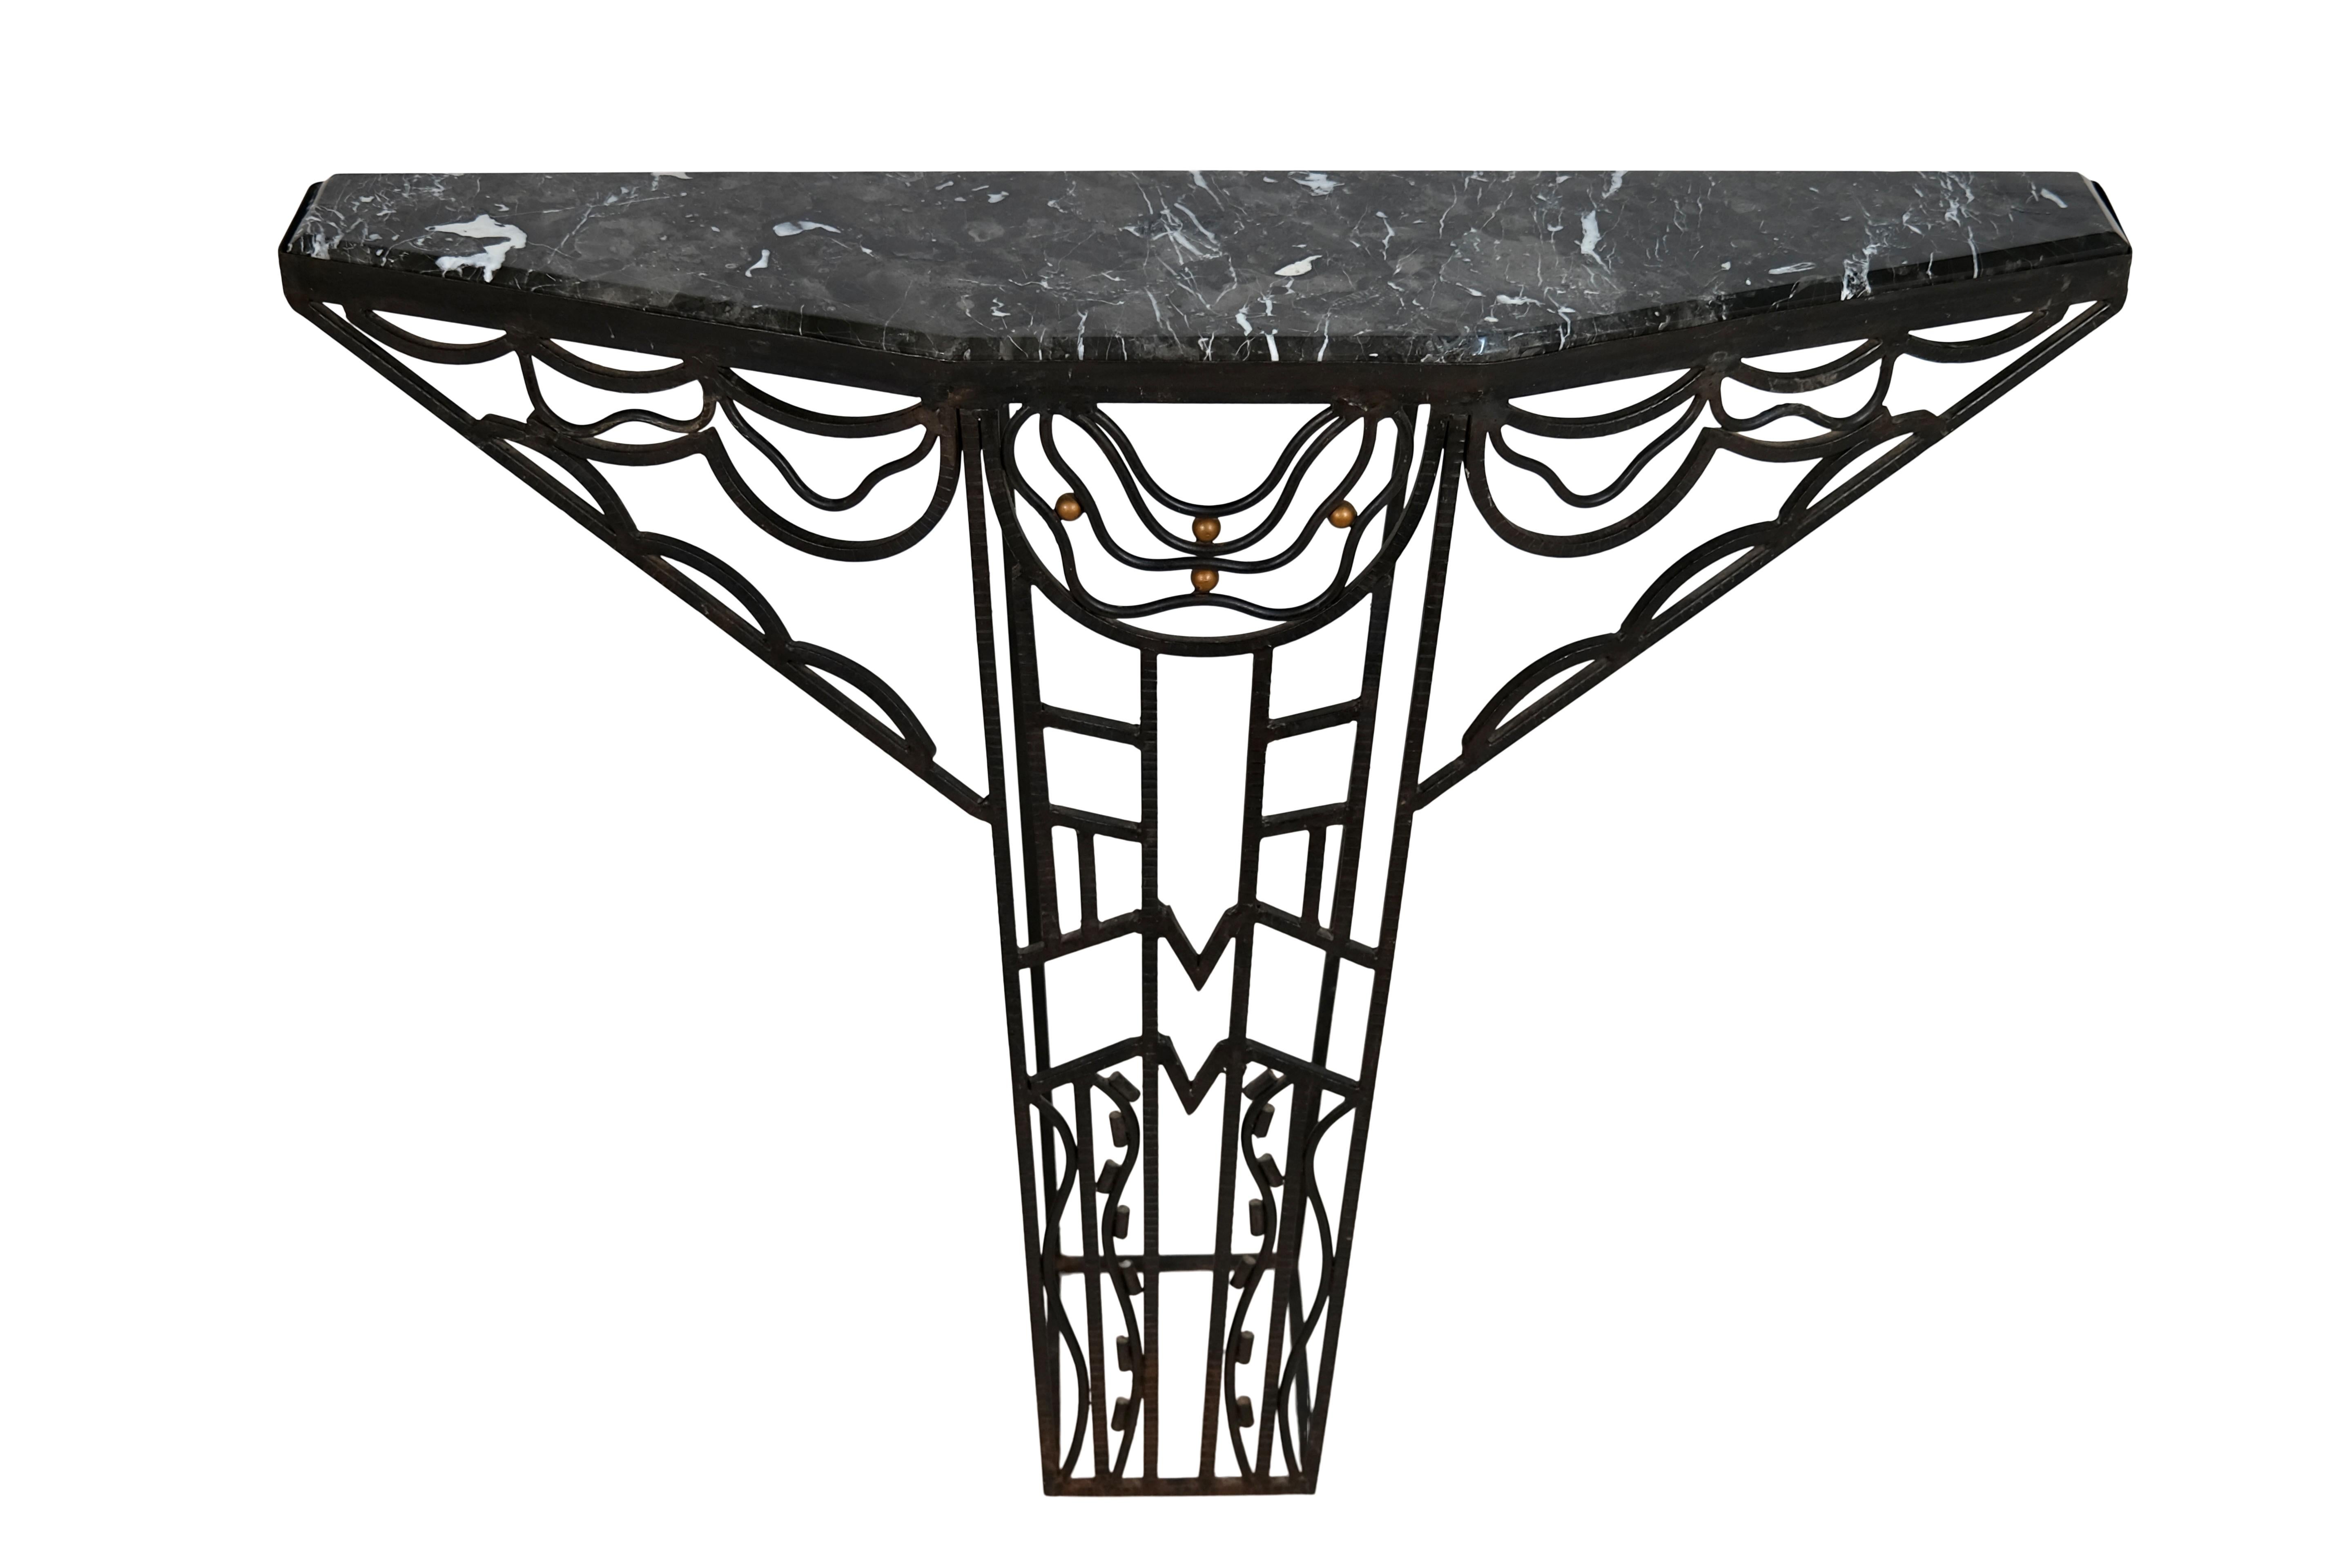 This wrought iron console with marble top is an original piece from the French Art Deco era of the 1930s. The wrought iron frame was skillfully crafted, showcasing the craftsmanship and attention to detail typical of the Art Deco era. The curved